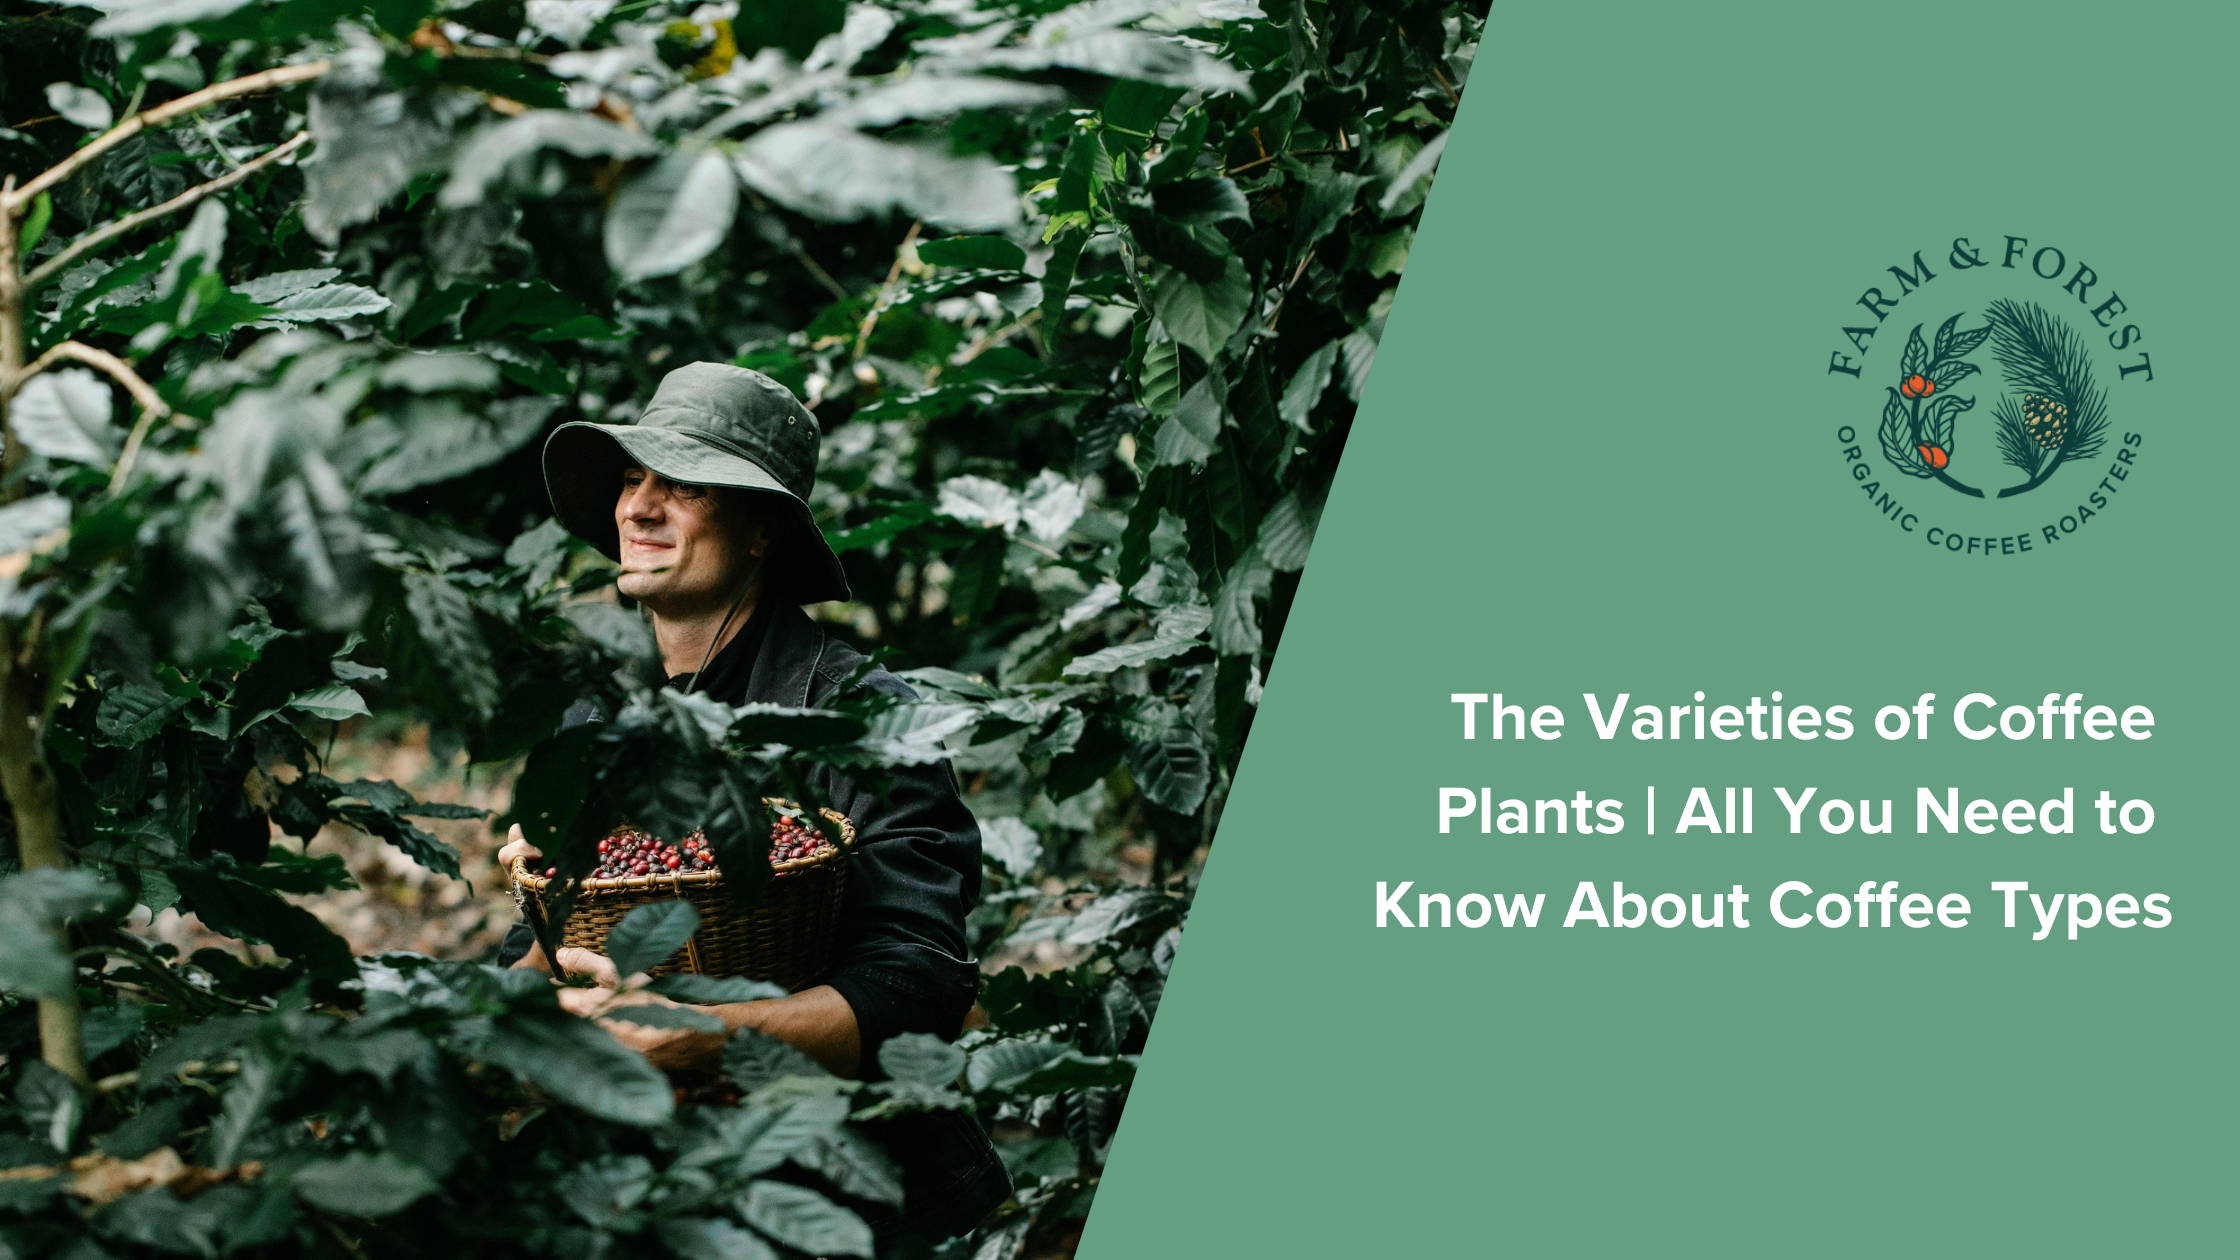 The Varieties of Coffee Plants | All You Need to Know About Coffee Types